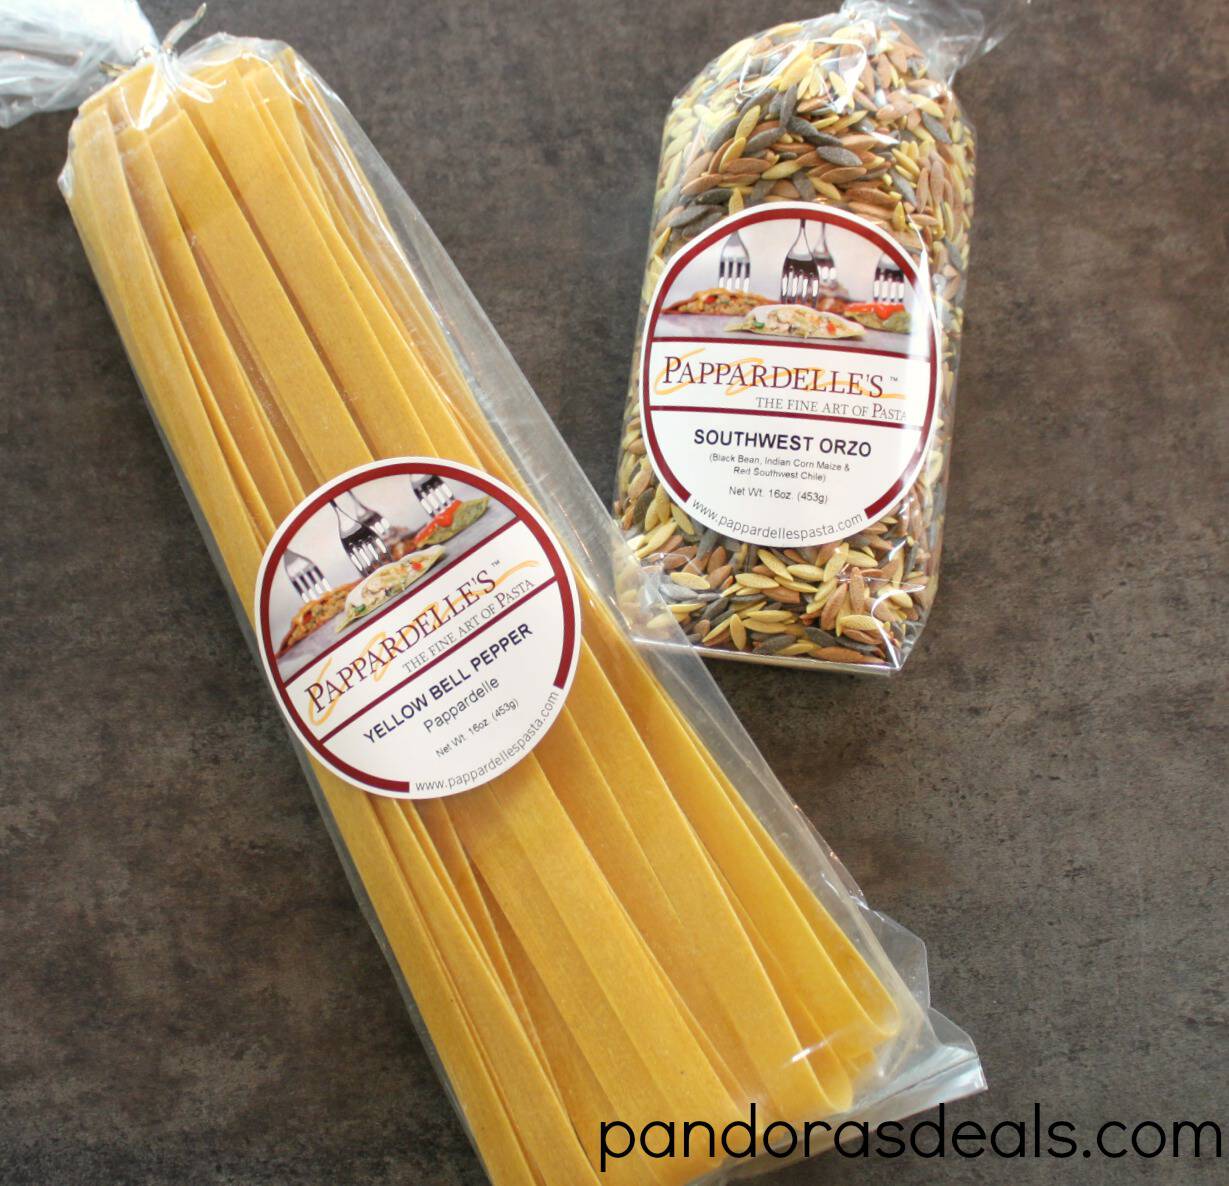 Pappardelle's Pasta